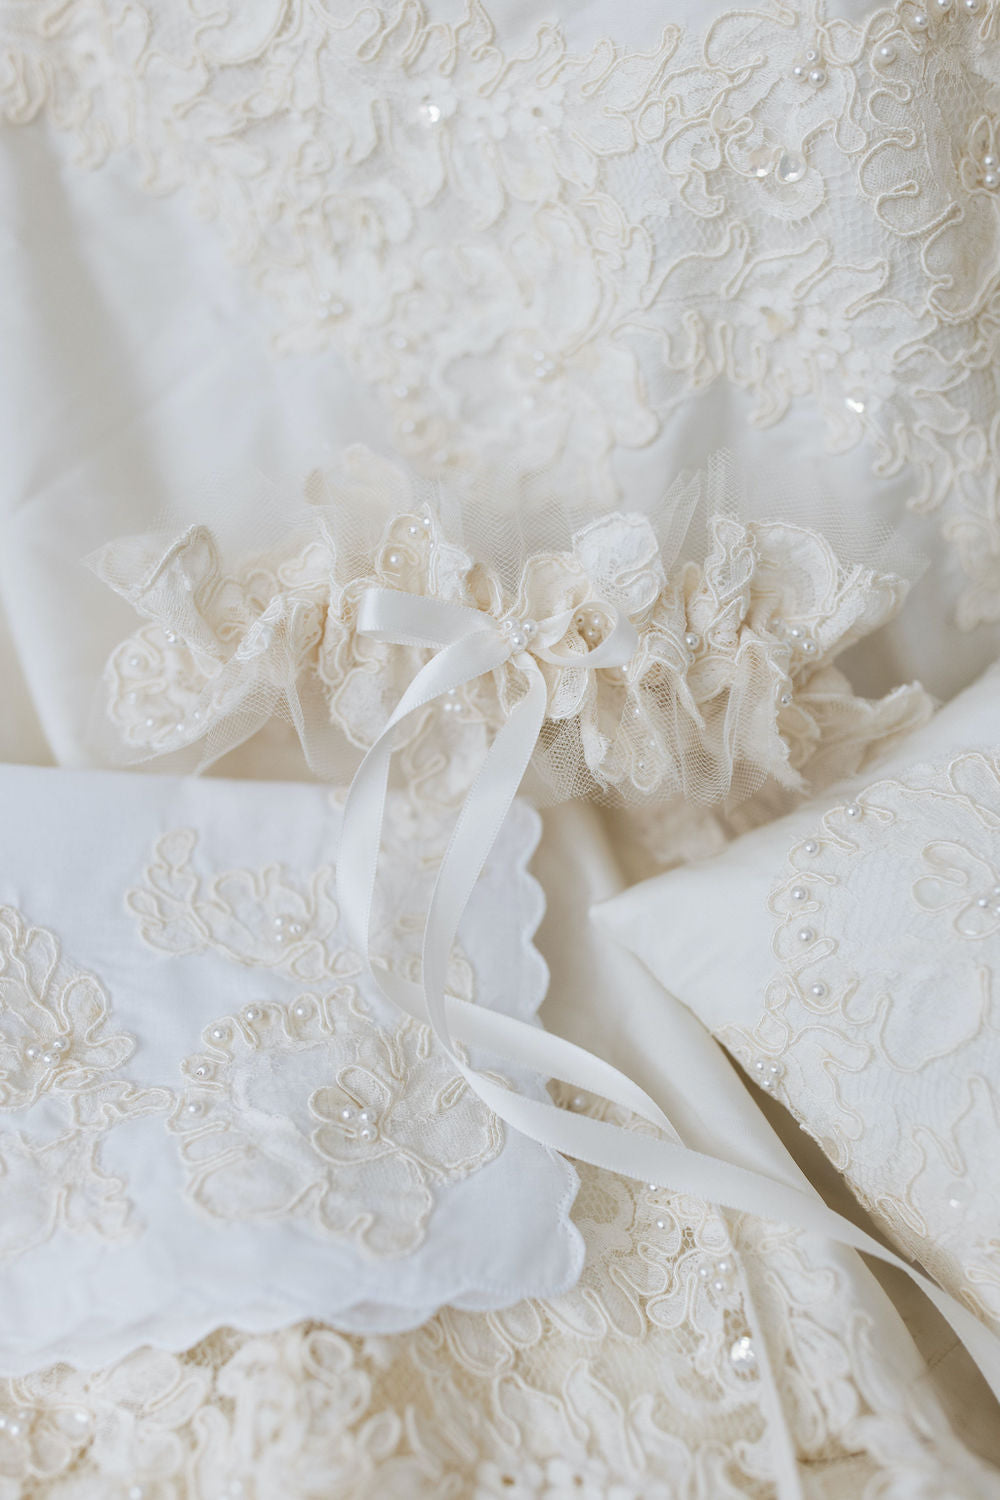 lace and pearl wedding garter ring pillow and handkerchief heirlooms from mom's wedding dress handmade by The Garter Girl